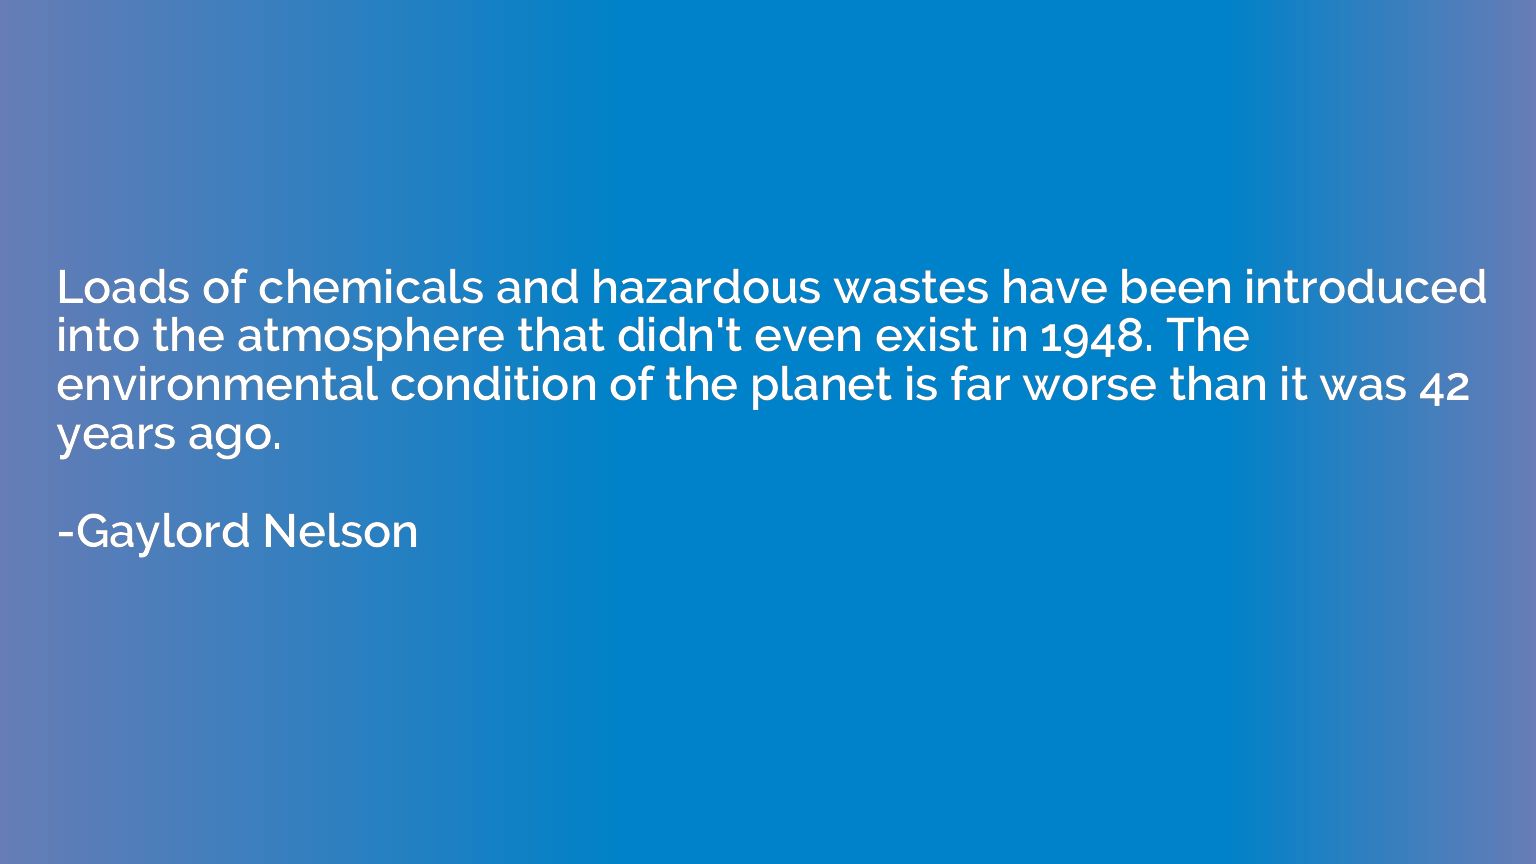 Loads of chemicals and hazardous wastes have been introduced